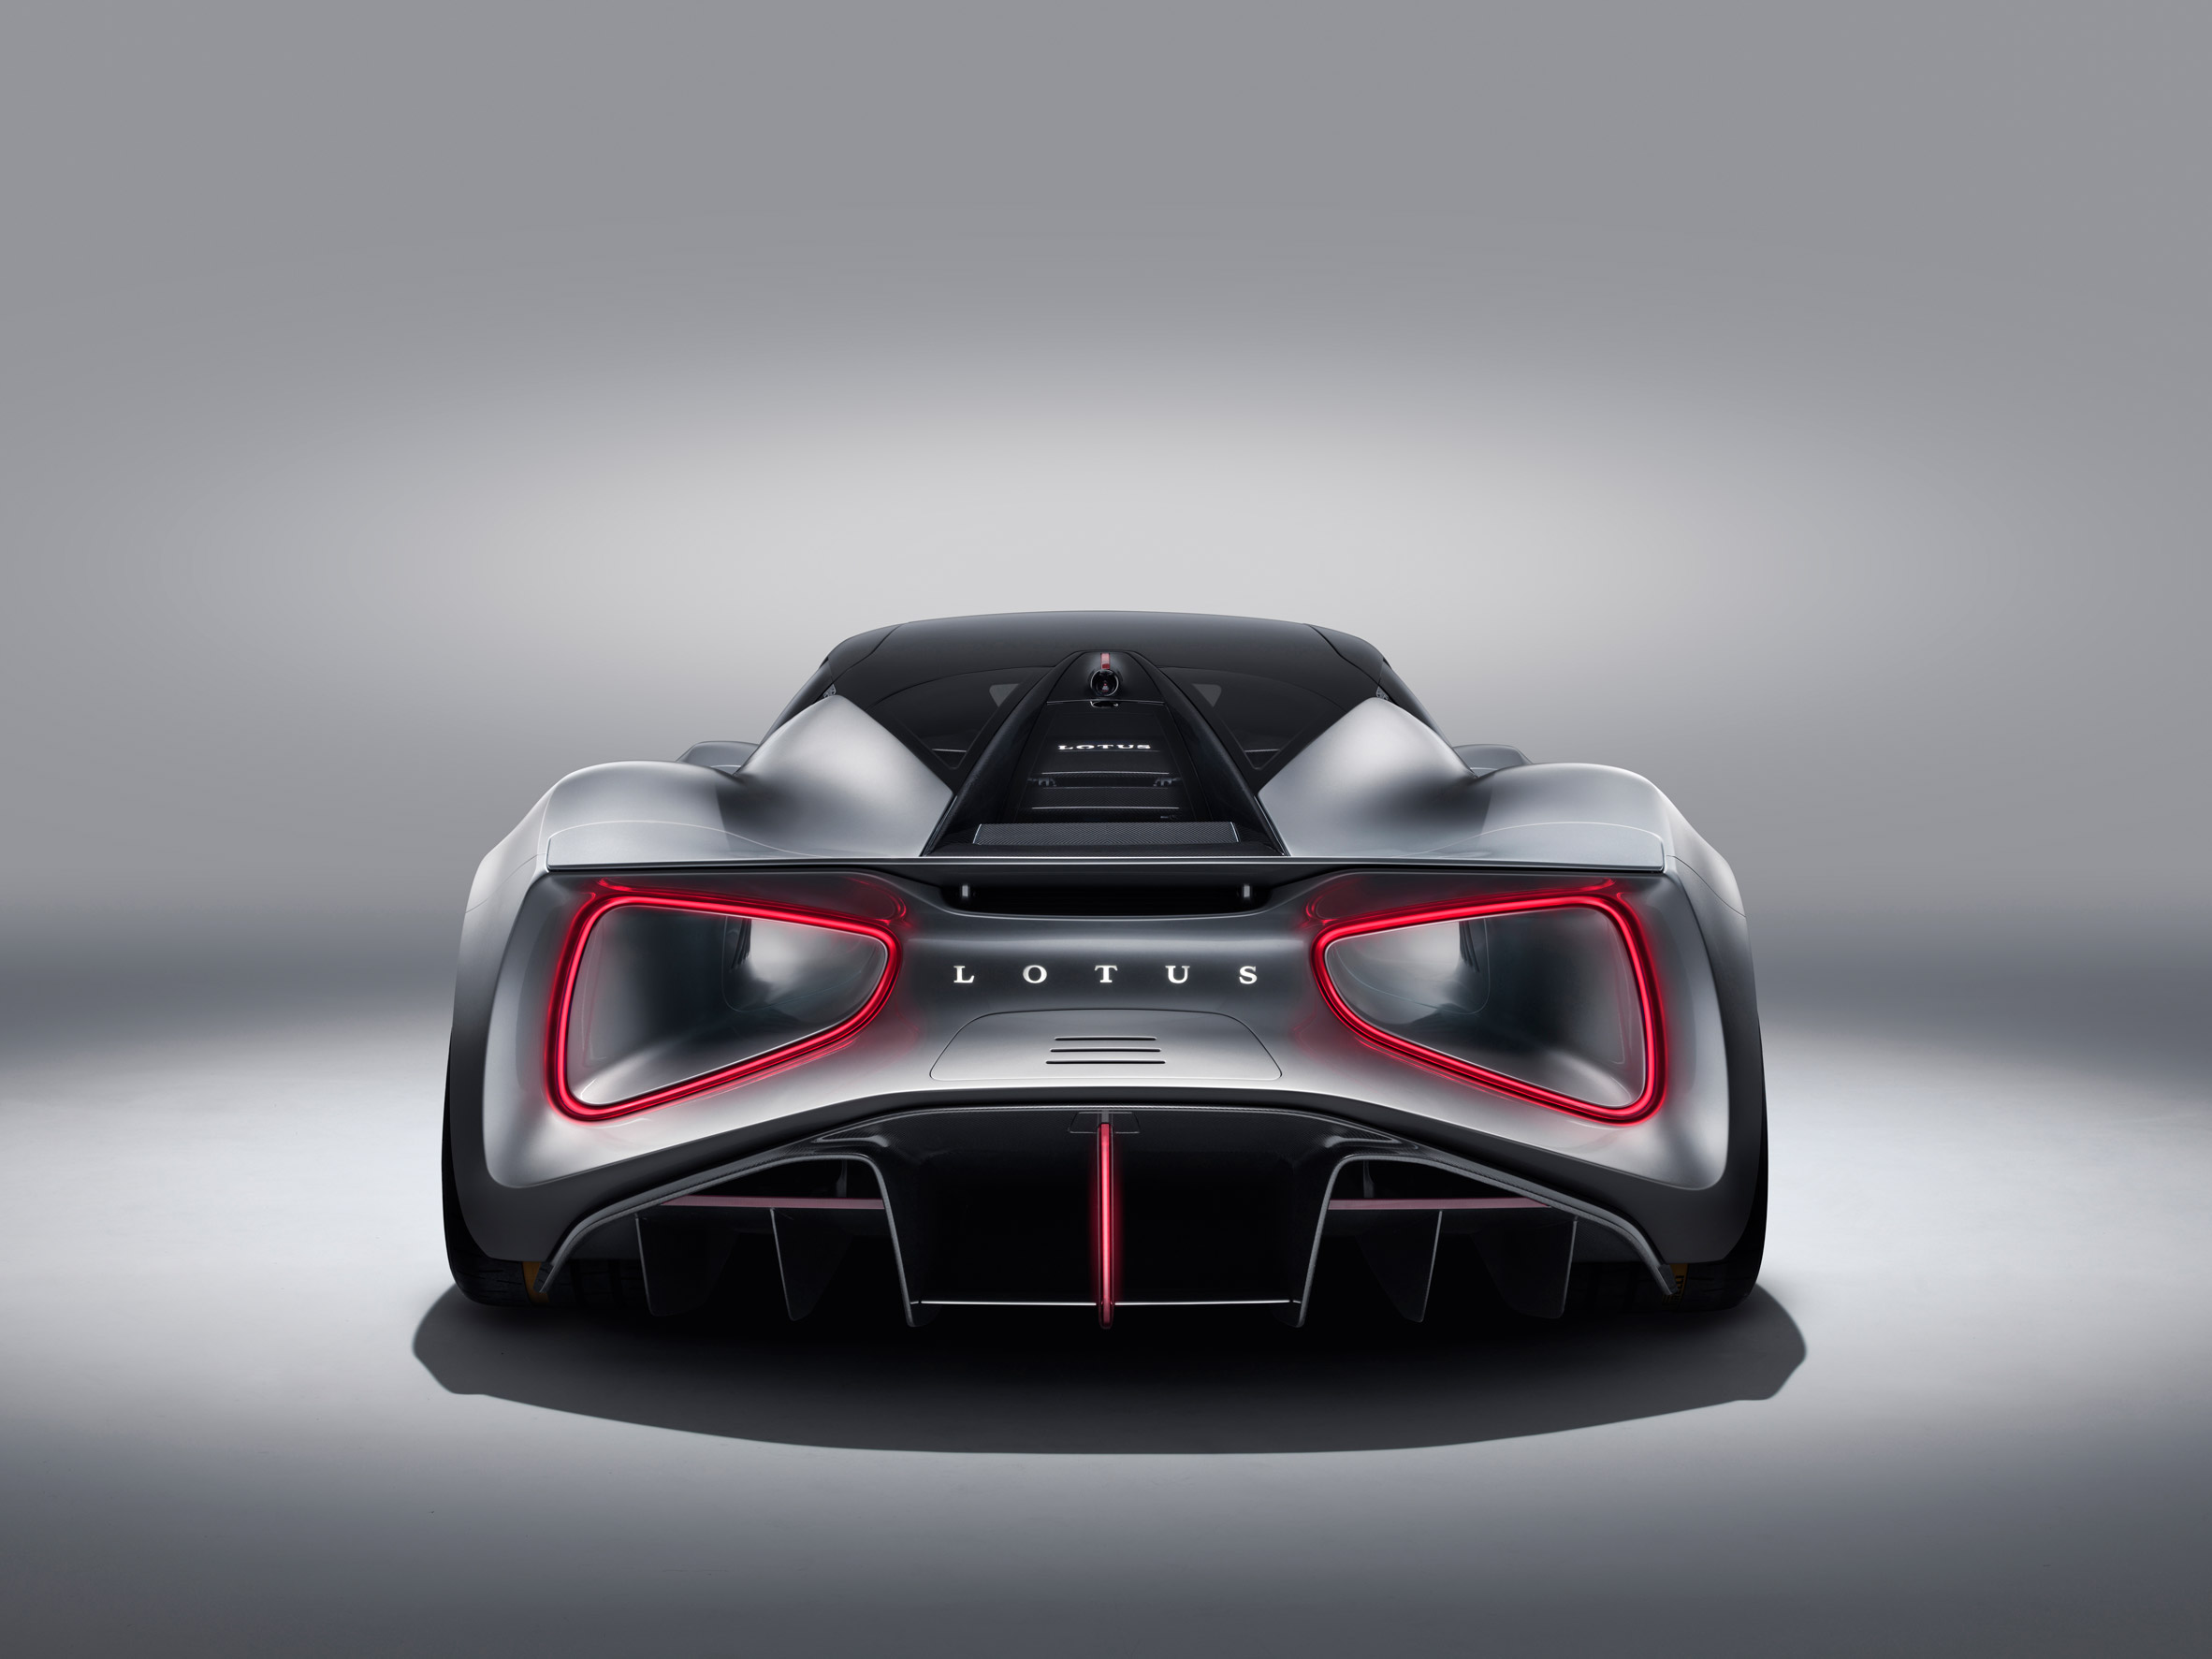 Lotus Evija is the "world's first" fully electric British hypercar